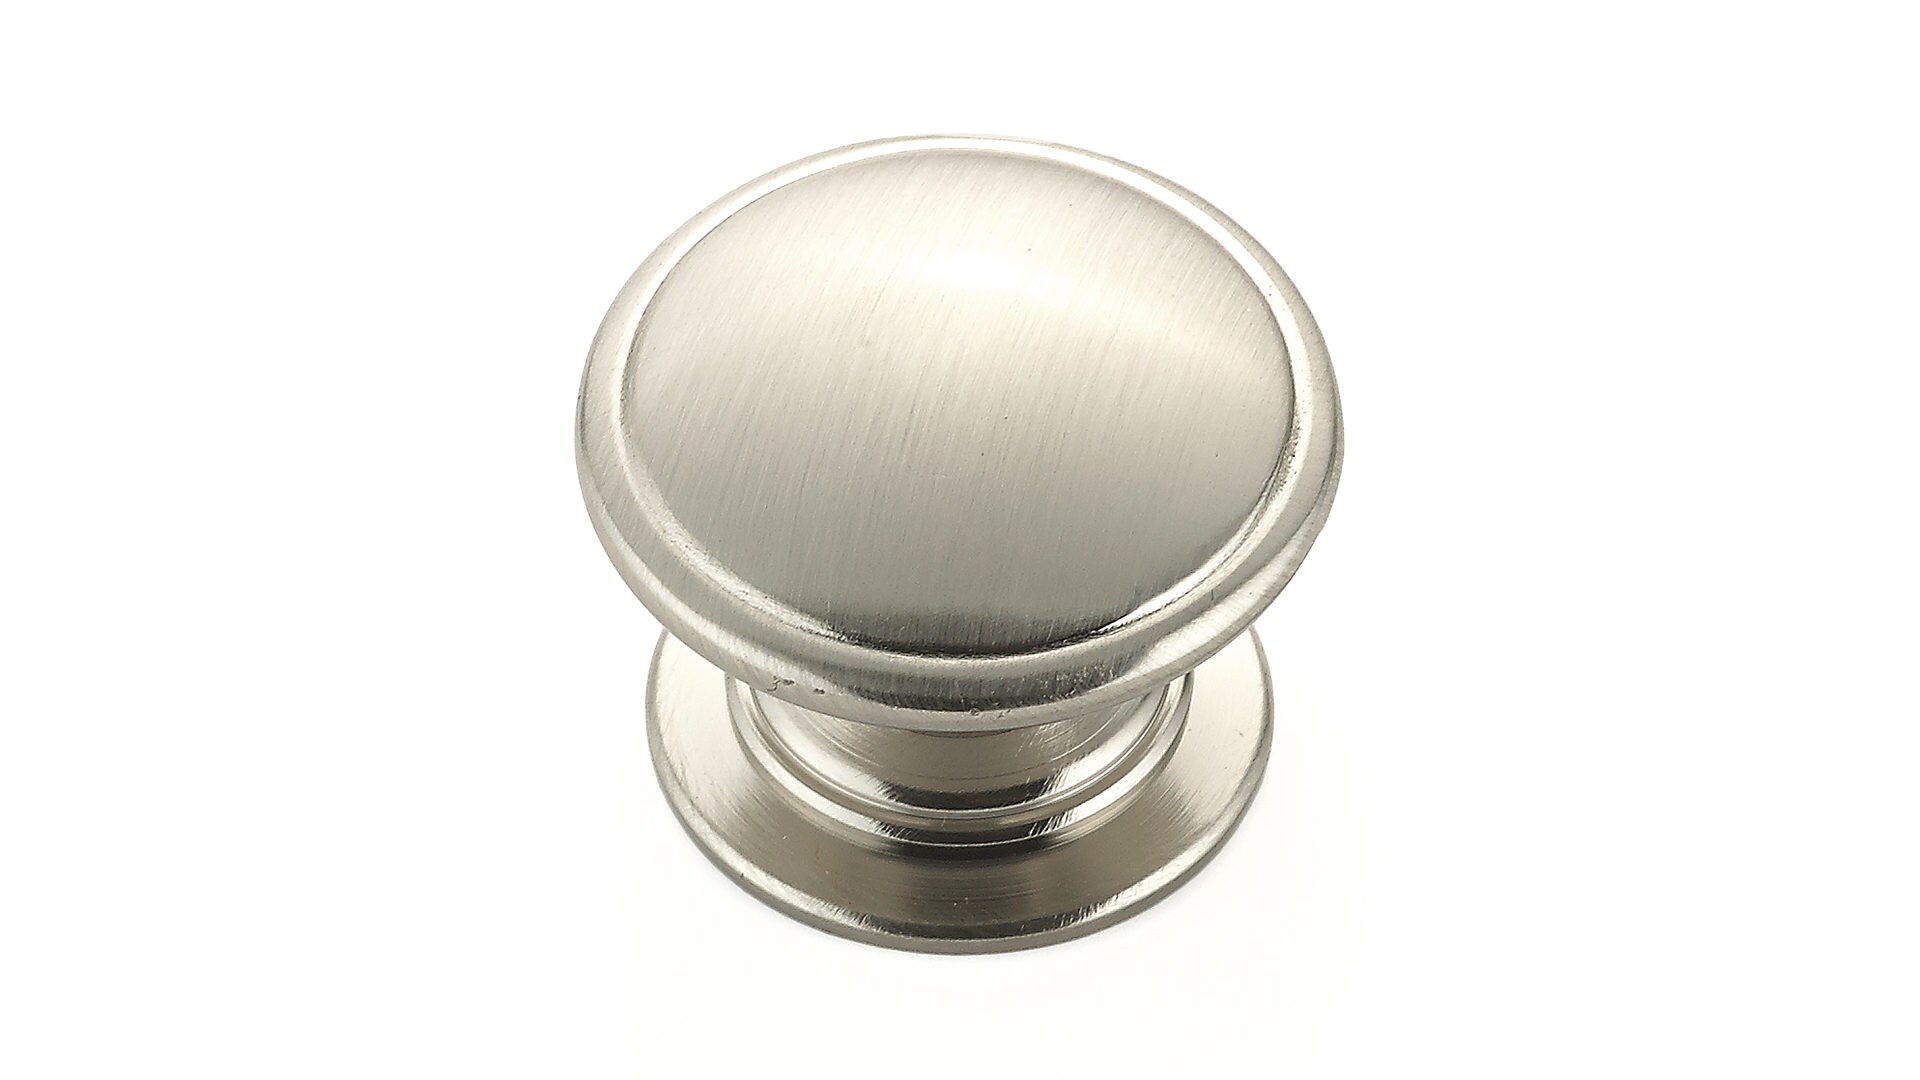 Cabinet Knobs 1-1/4" Diameter Solid Round Shape in 9 Finishes By FPL Door Locks 